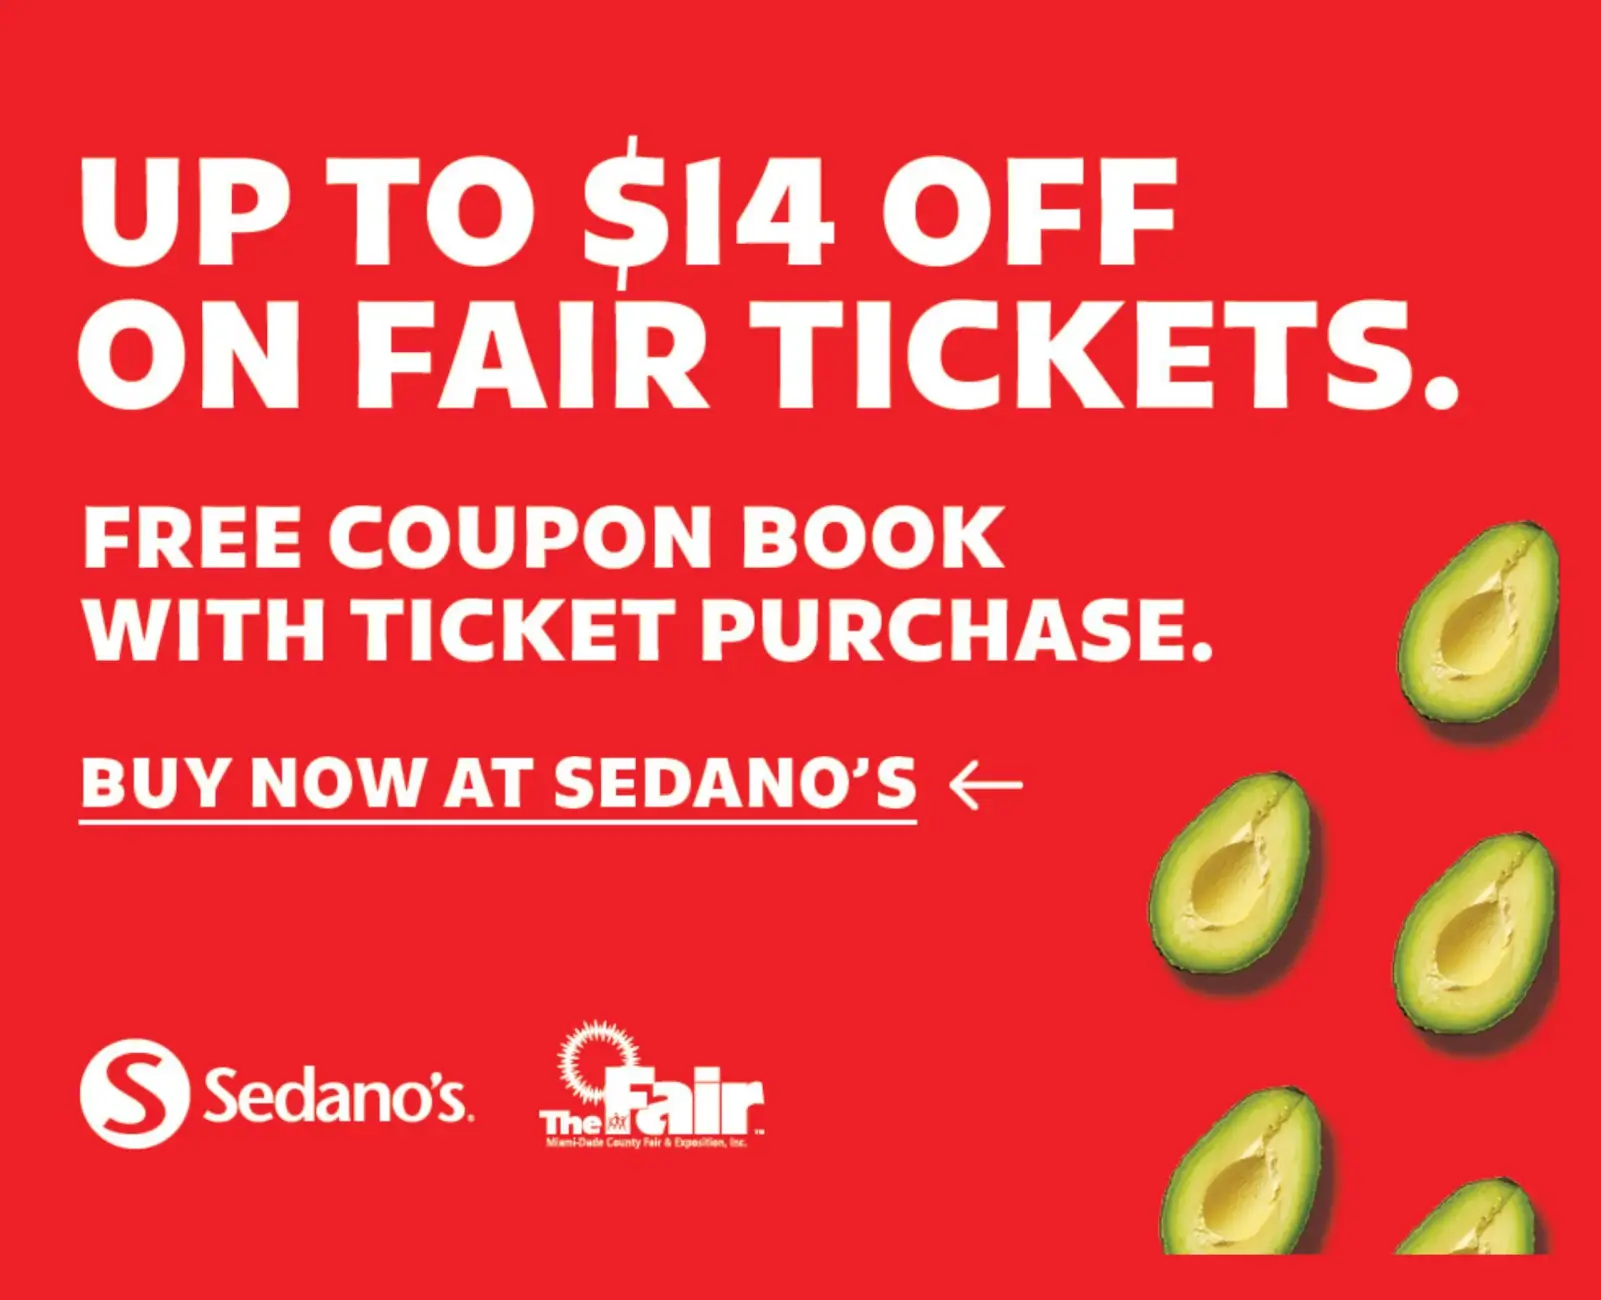 Save $14 Off Youth Fair Tickets at Sedano's